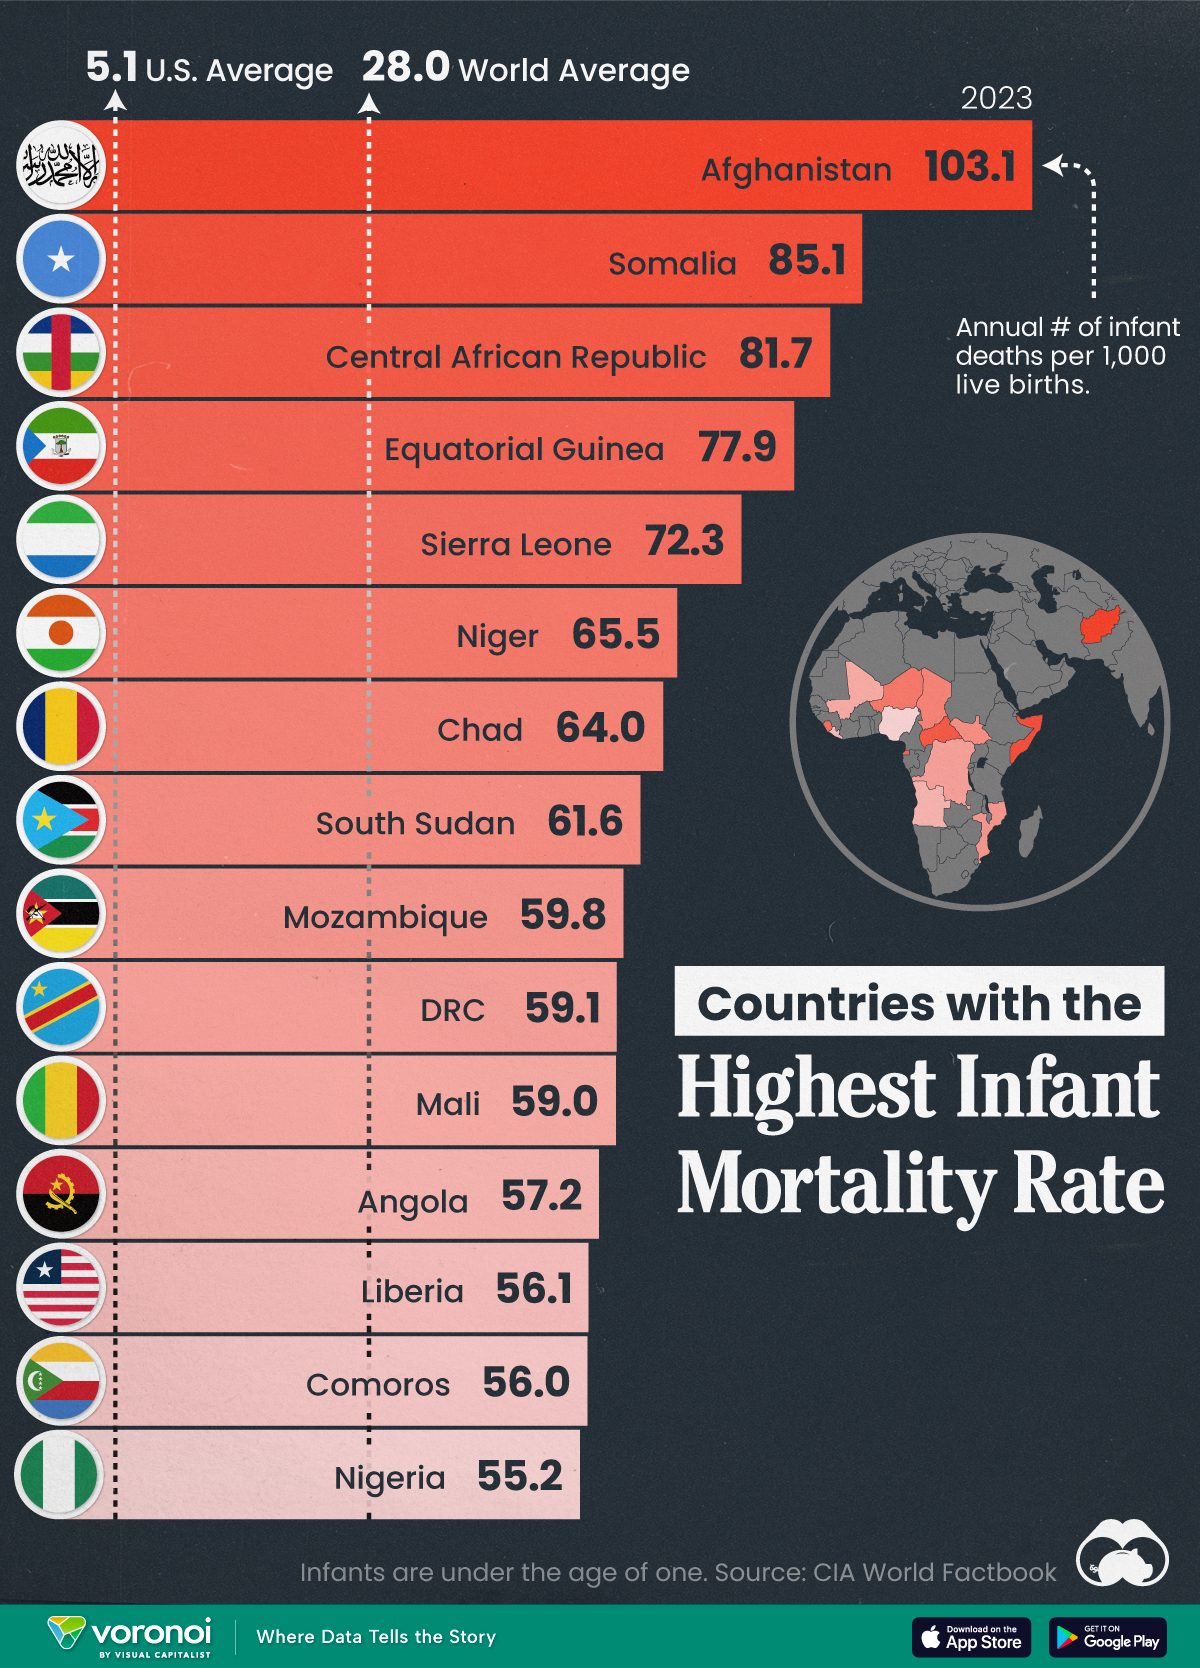 A chart of the top 15 countries with the highest infant mortality rates.